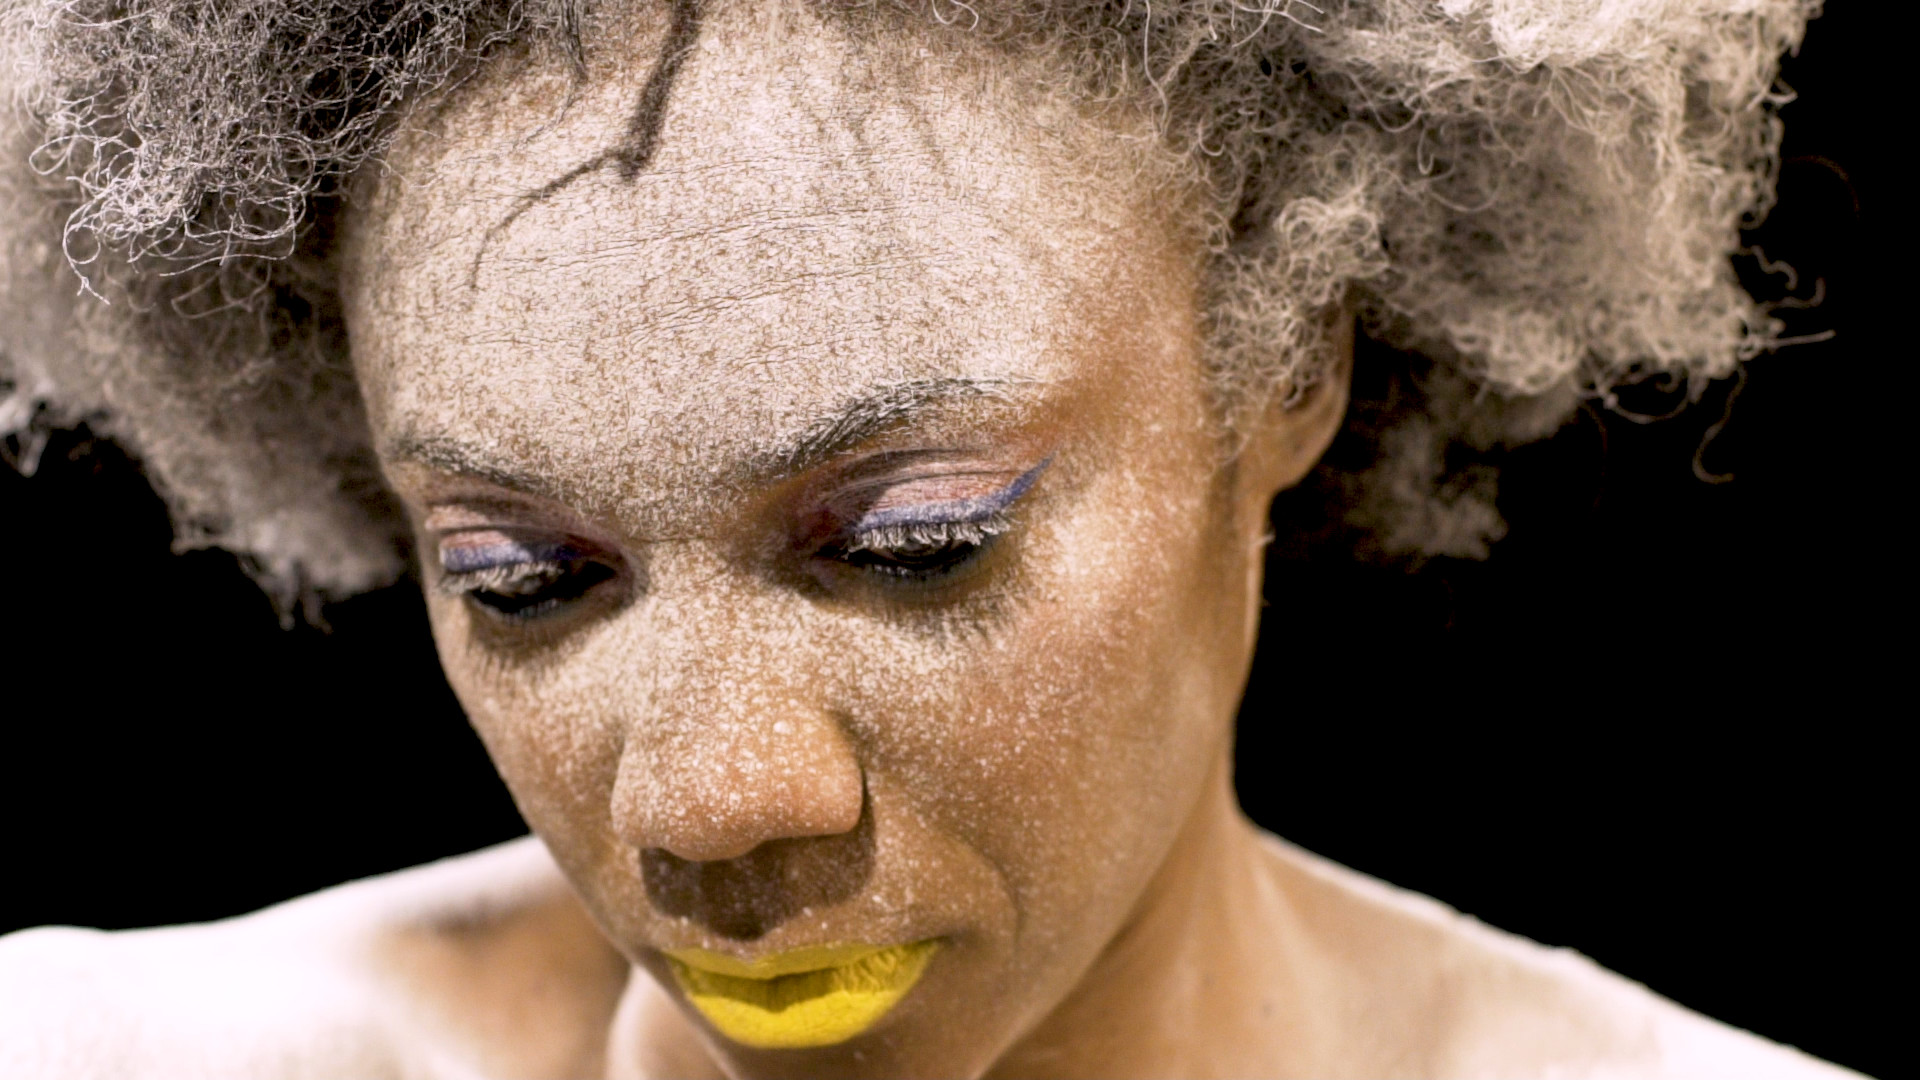 A woman with powder on her face and yellow-painted lips looks down mournfully.